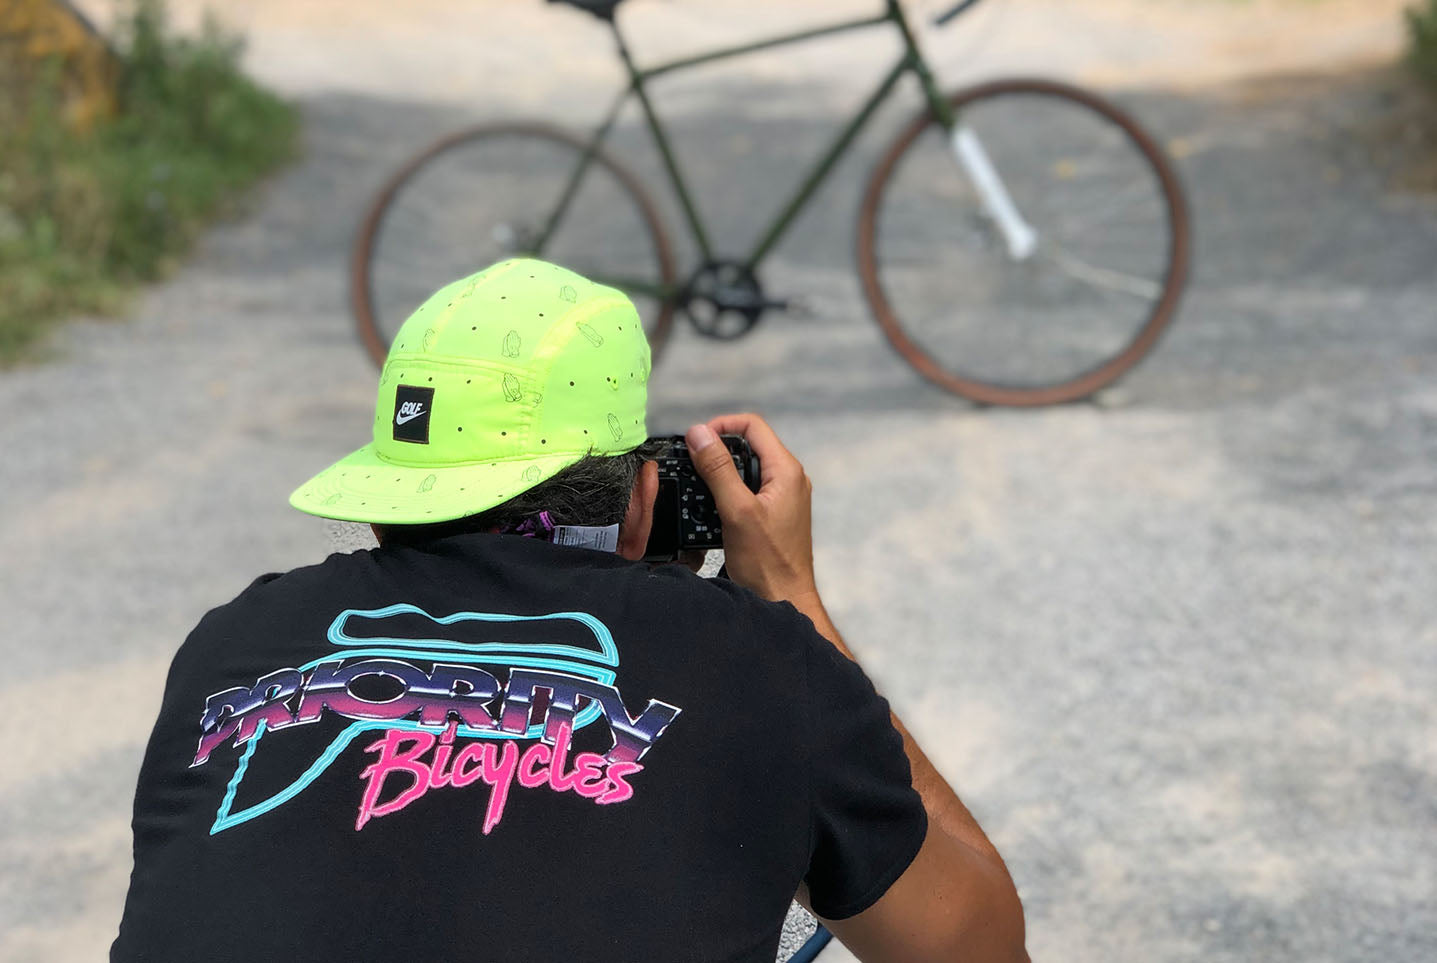 Priority Bicycles Logo Tron T-Shirt